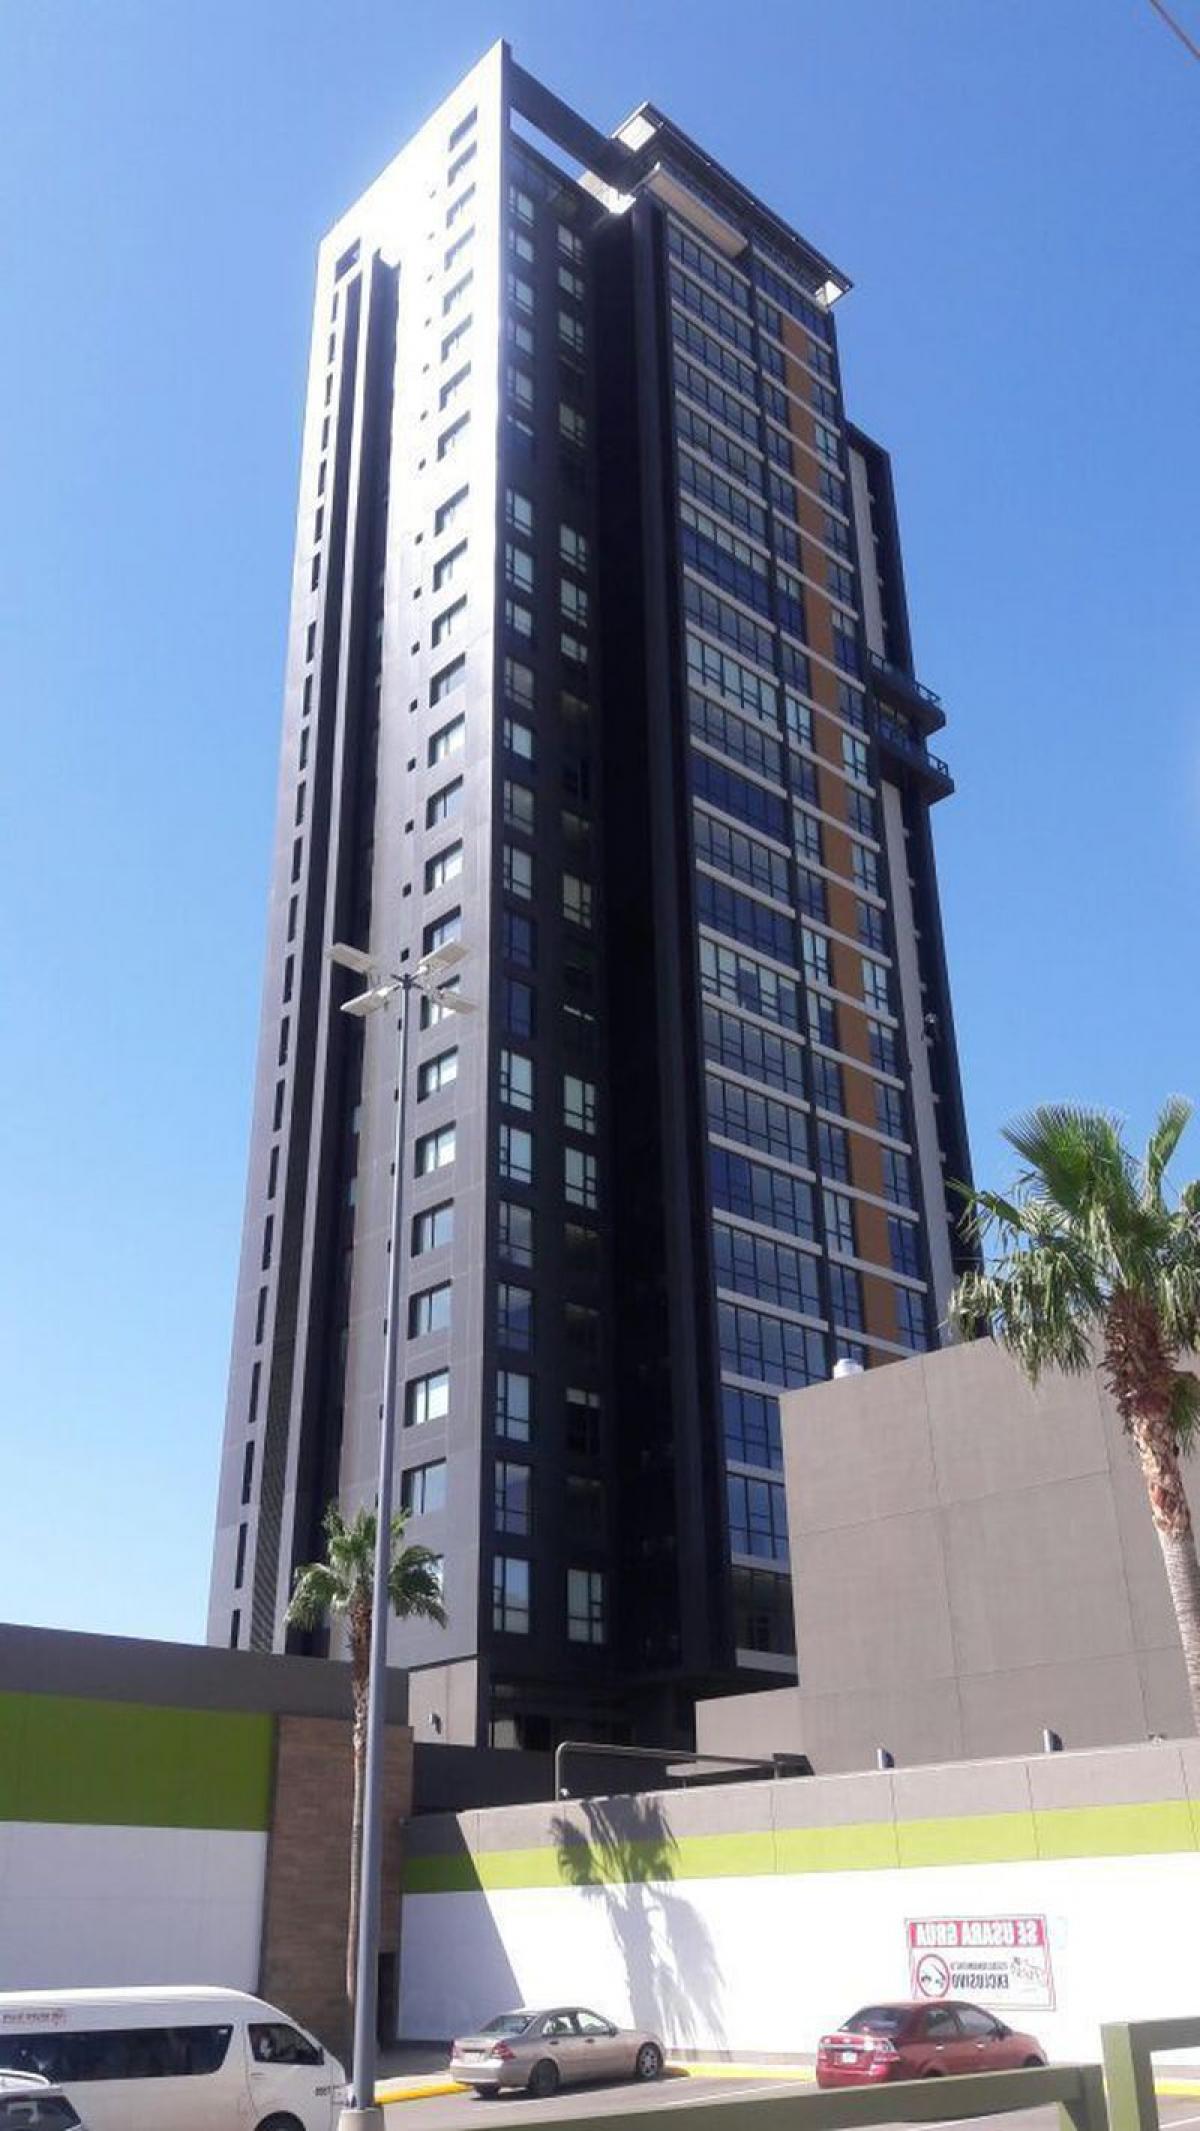 Picture of Apartment For Sale in Chihuahua, Chihuahua, Mexico